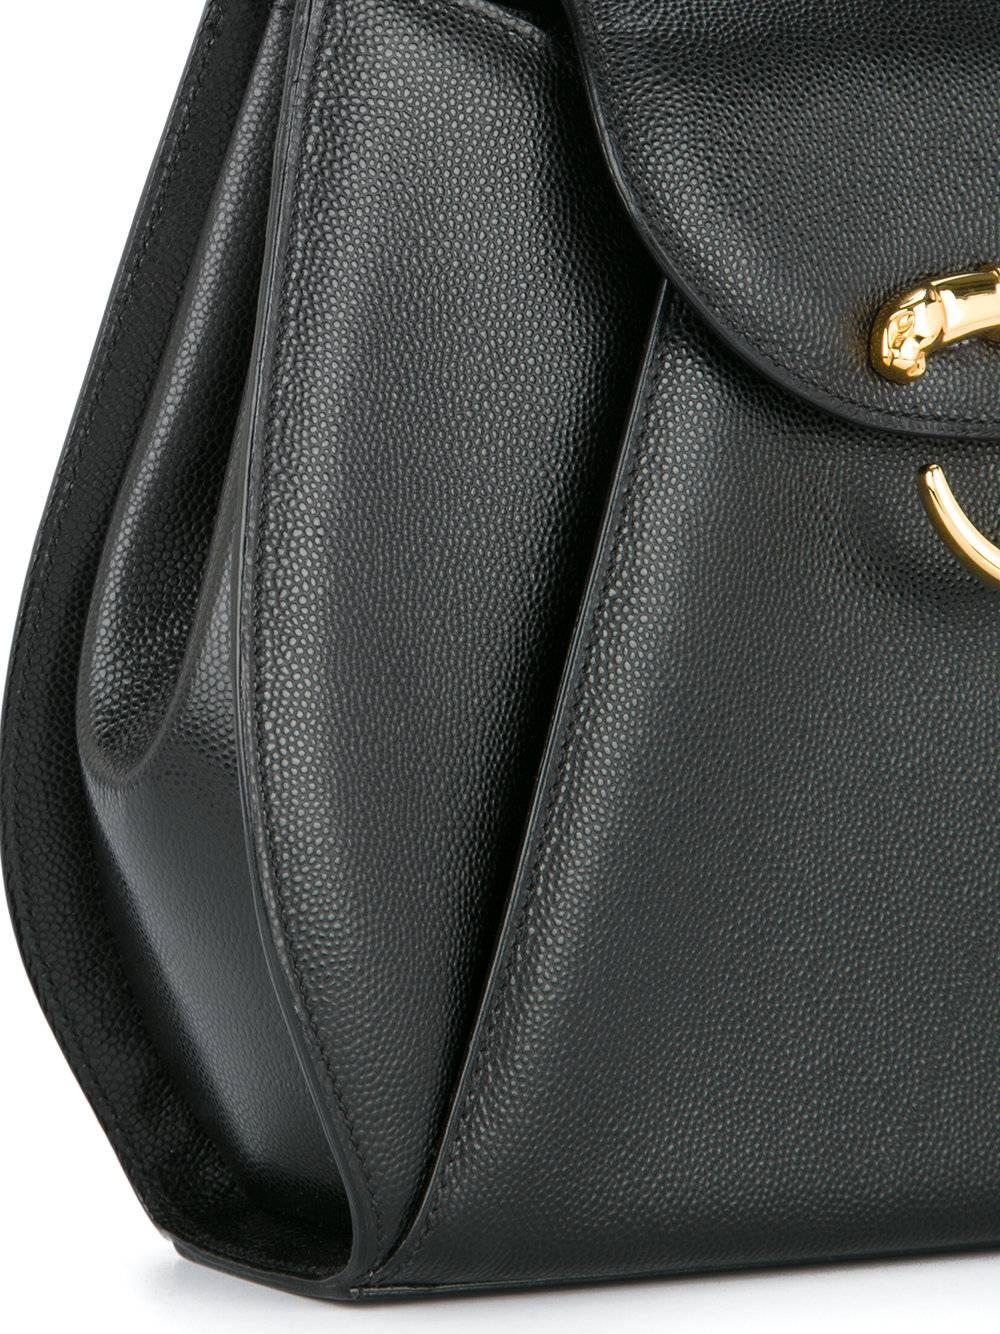 Cartier Black Leather Gold Emblem Top Handle Satchel Evening Bag in Box In Excellent Condition In Chicago, IL